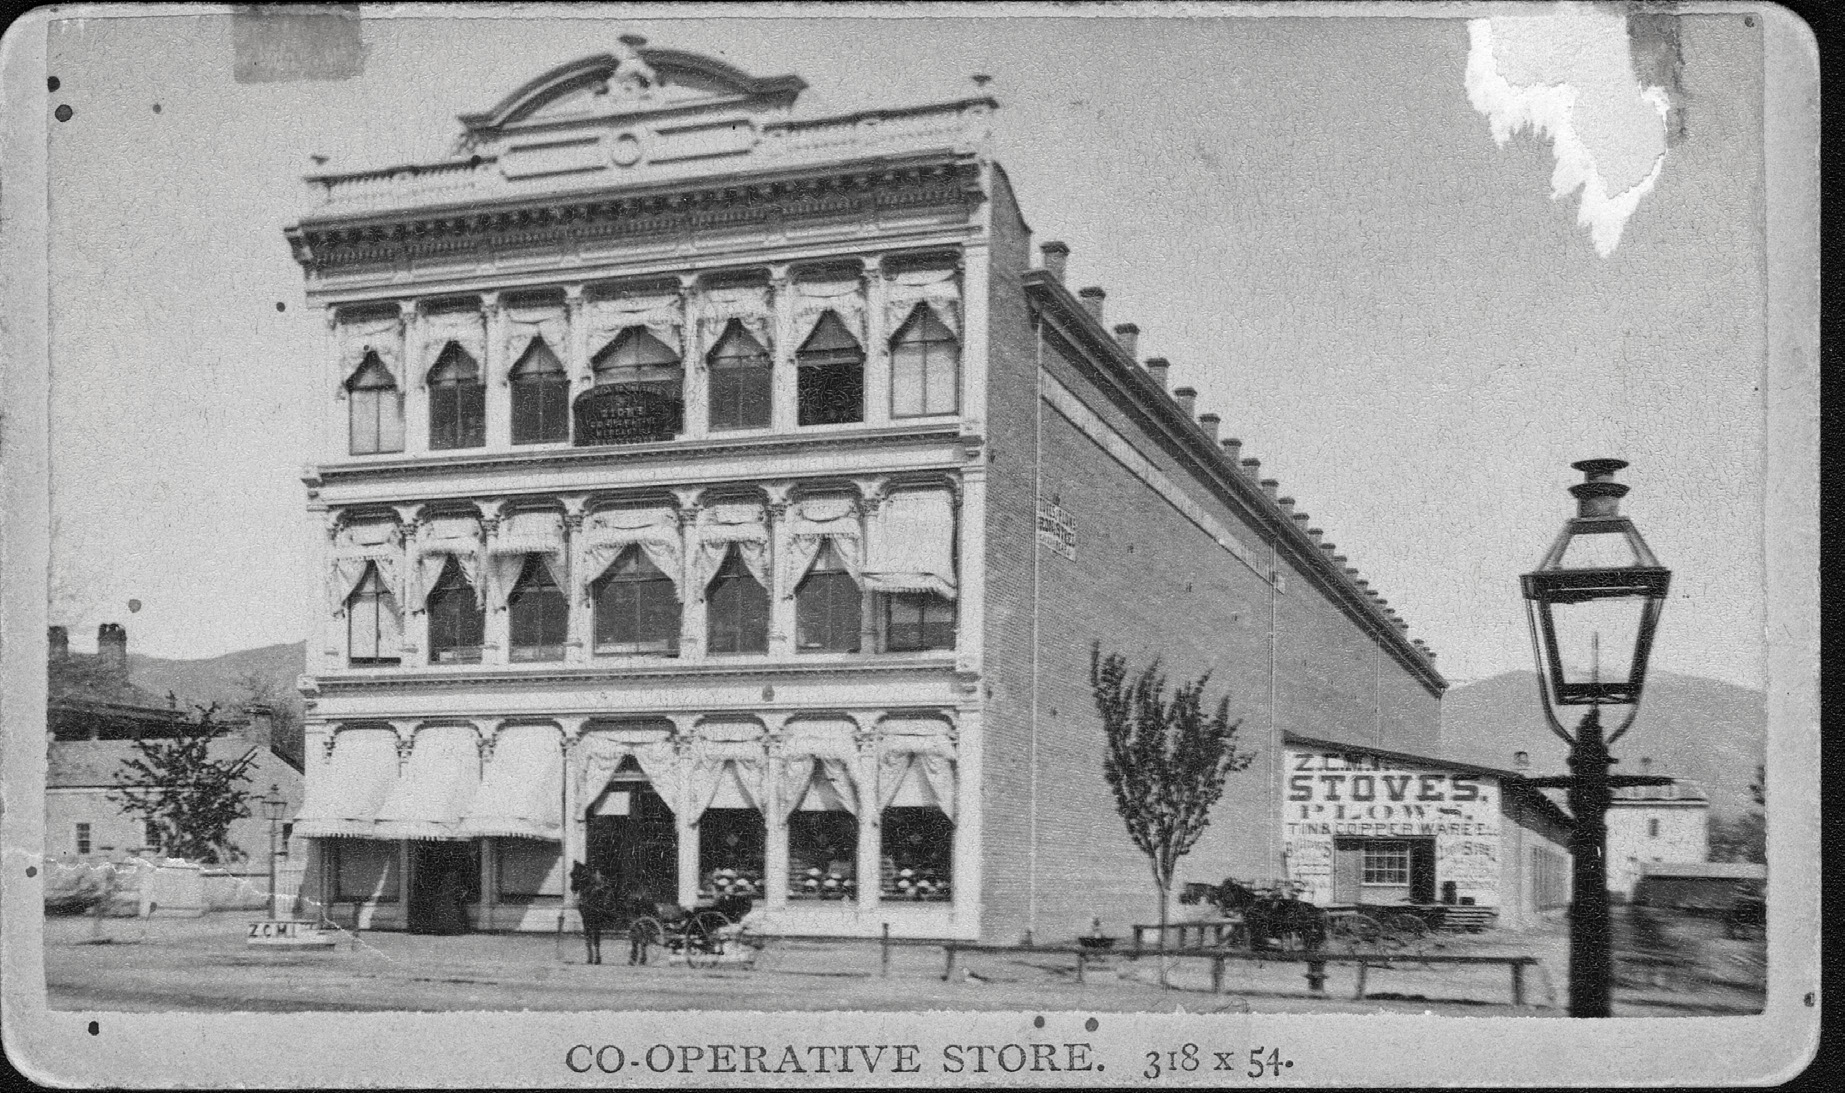 ZCMI flagship store in Salt Lake City circa 1878 before two additions tripled its frontage on Main Street. The original façade was successfully integrated into the new City Creek Center development in 2012. Courtesy of the Church History Library.